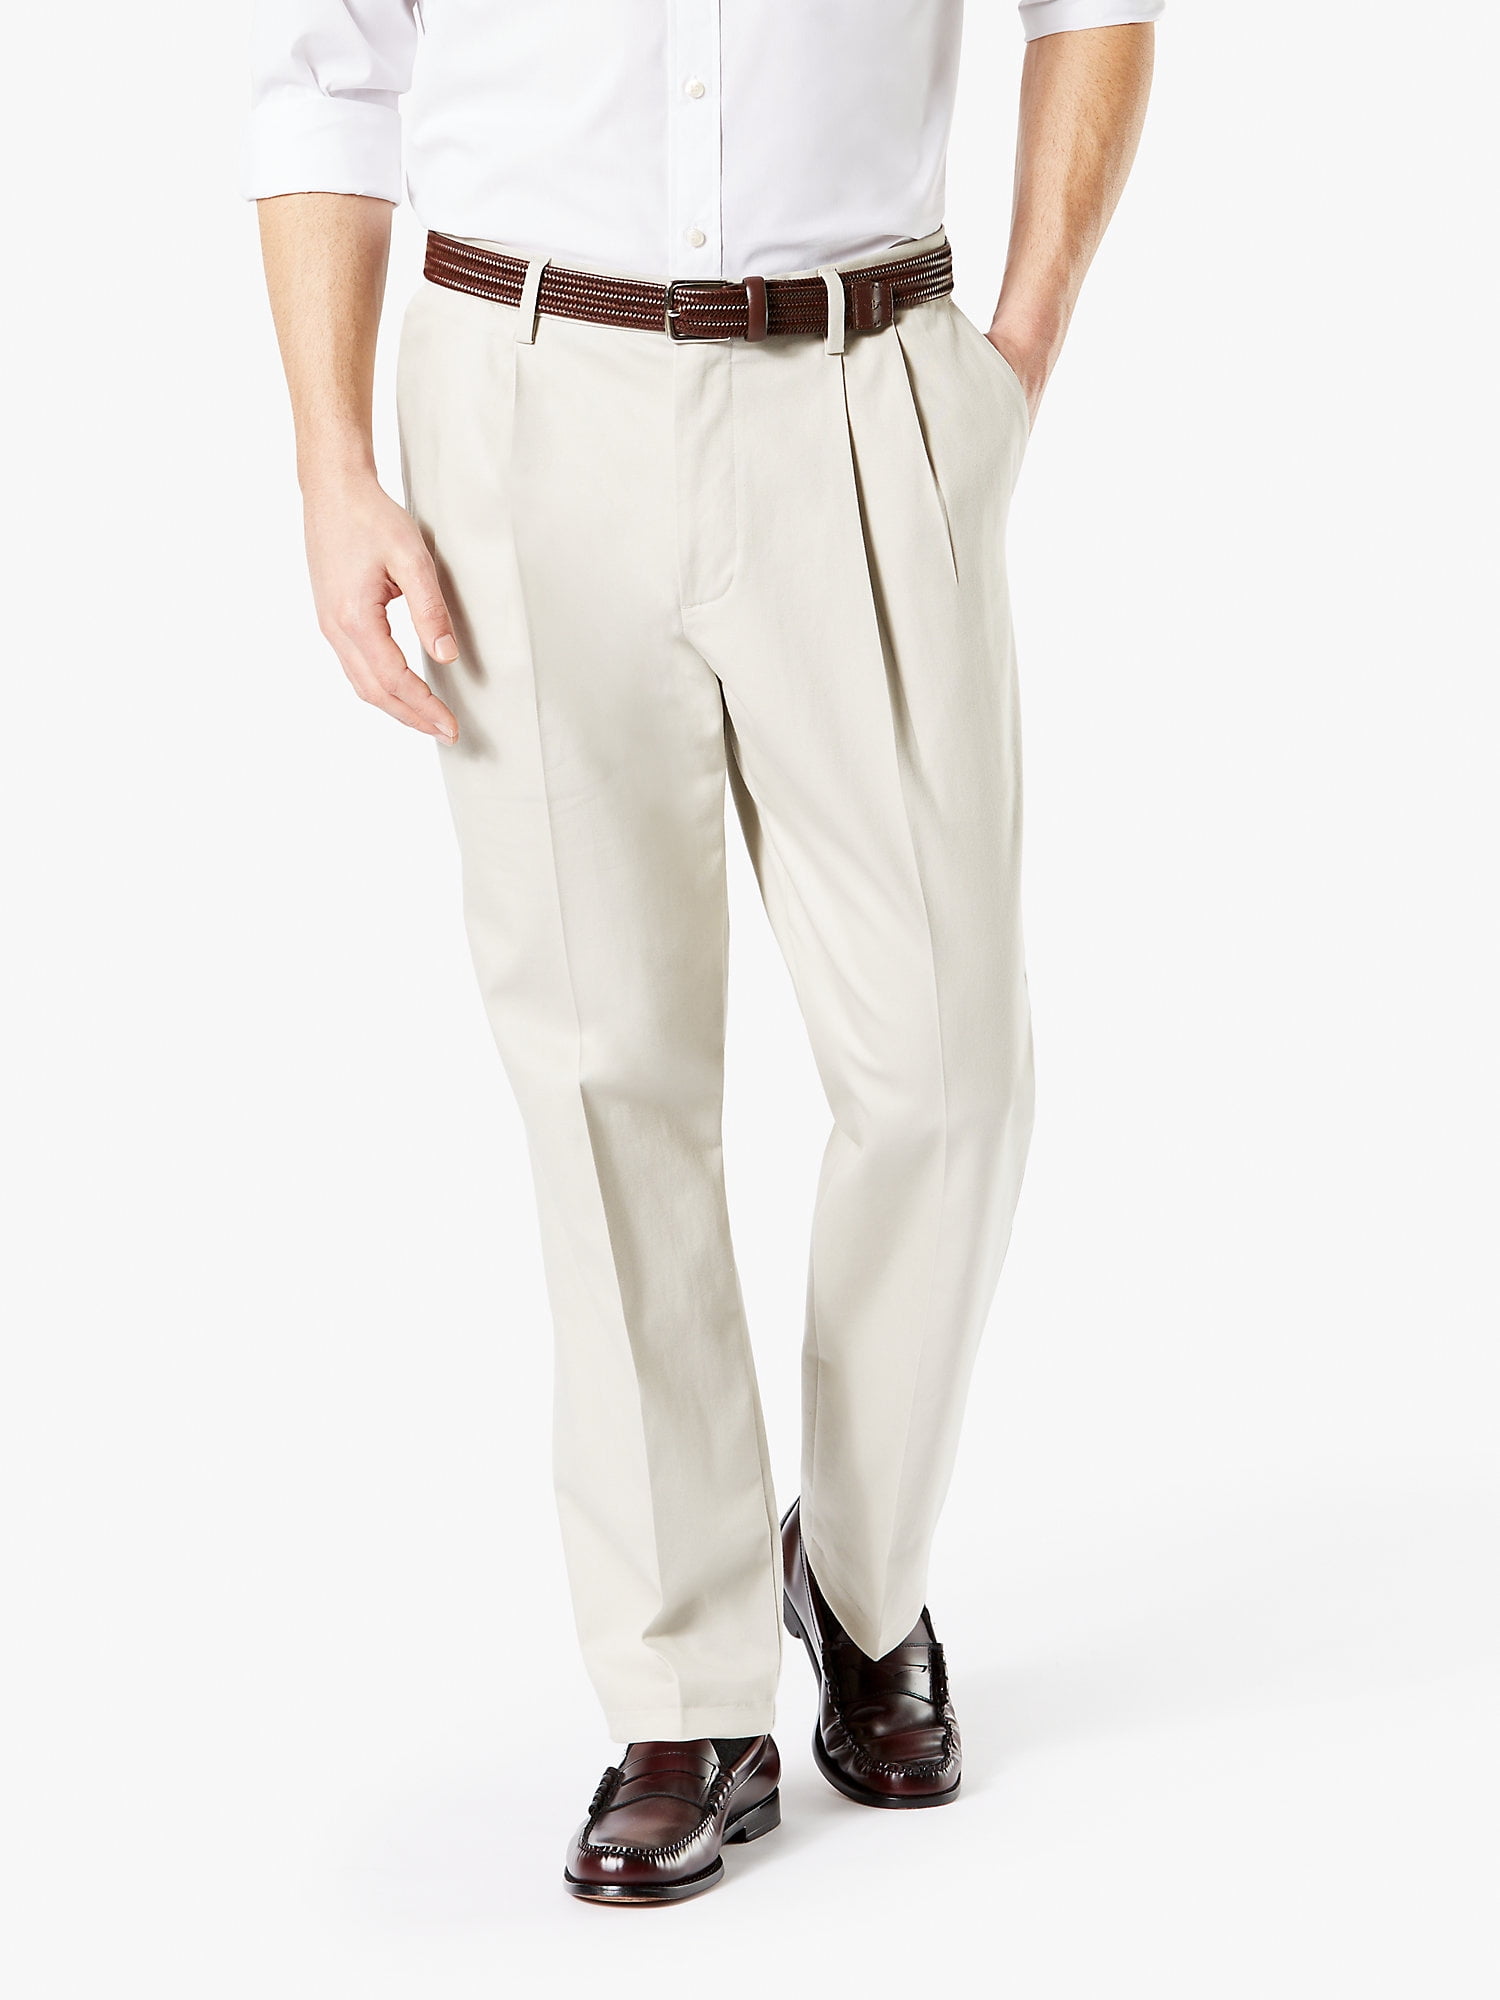 Dockers Mens Slim Fit Trouser with Stretch Waistband Business Casual Pants